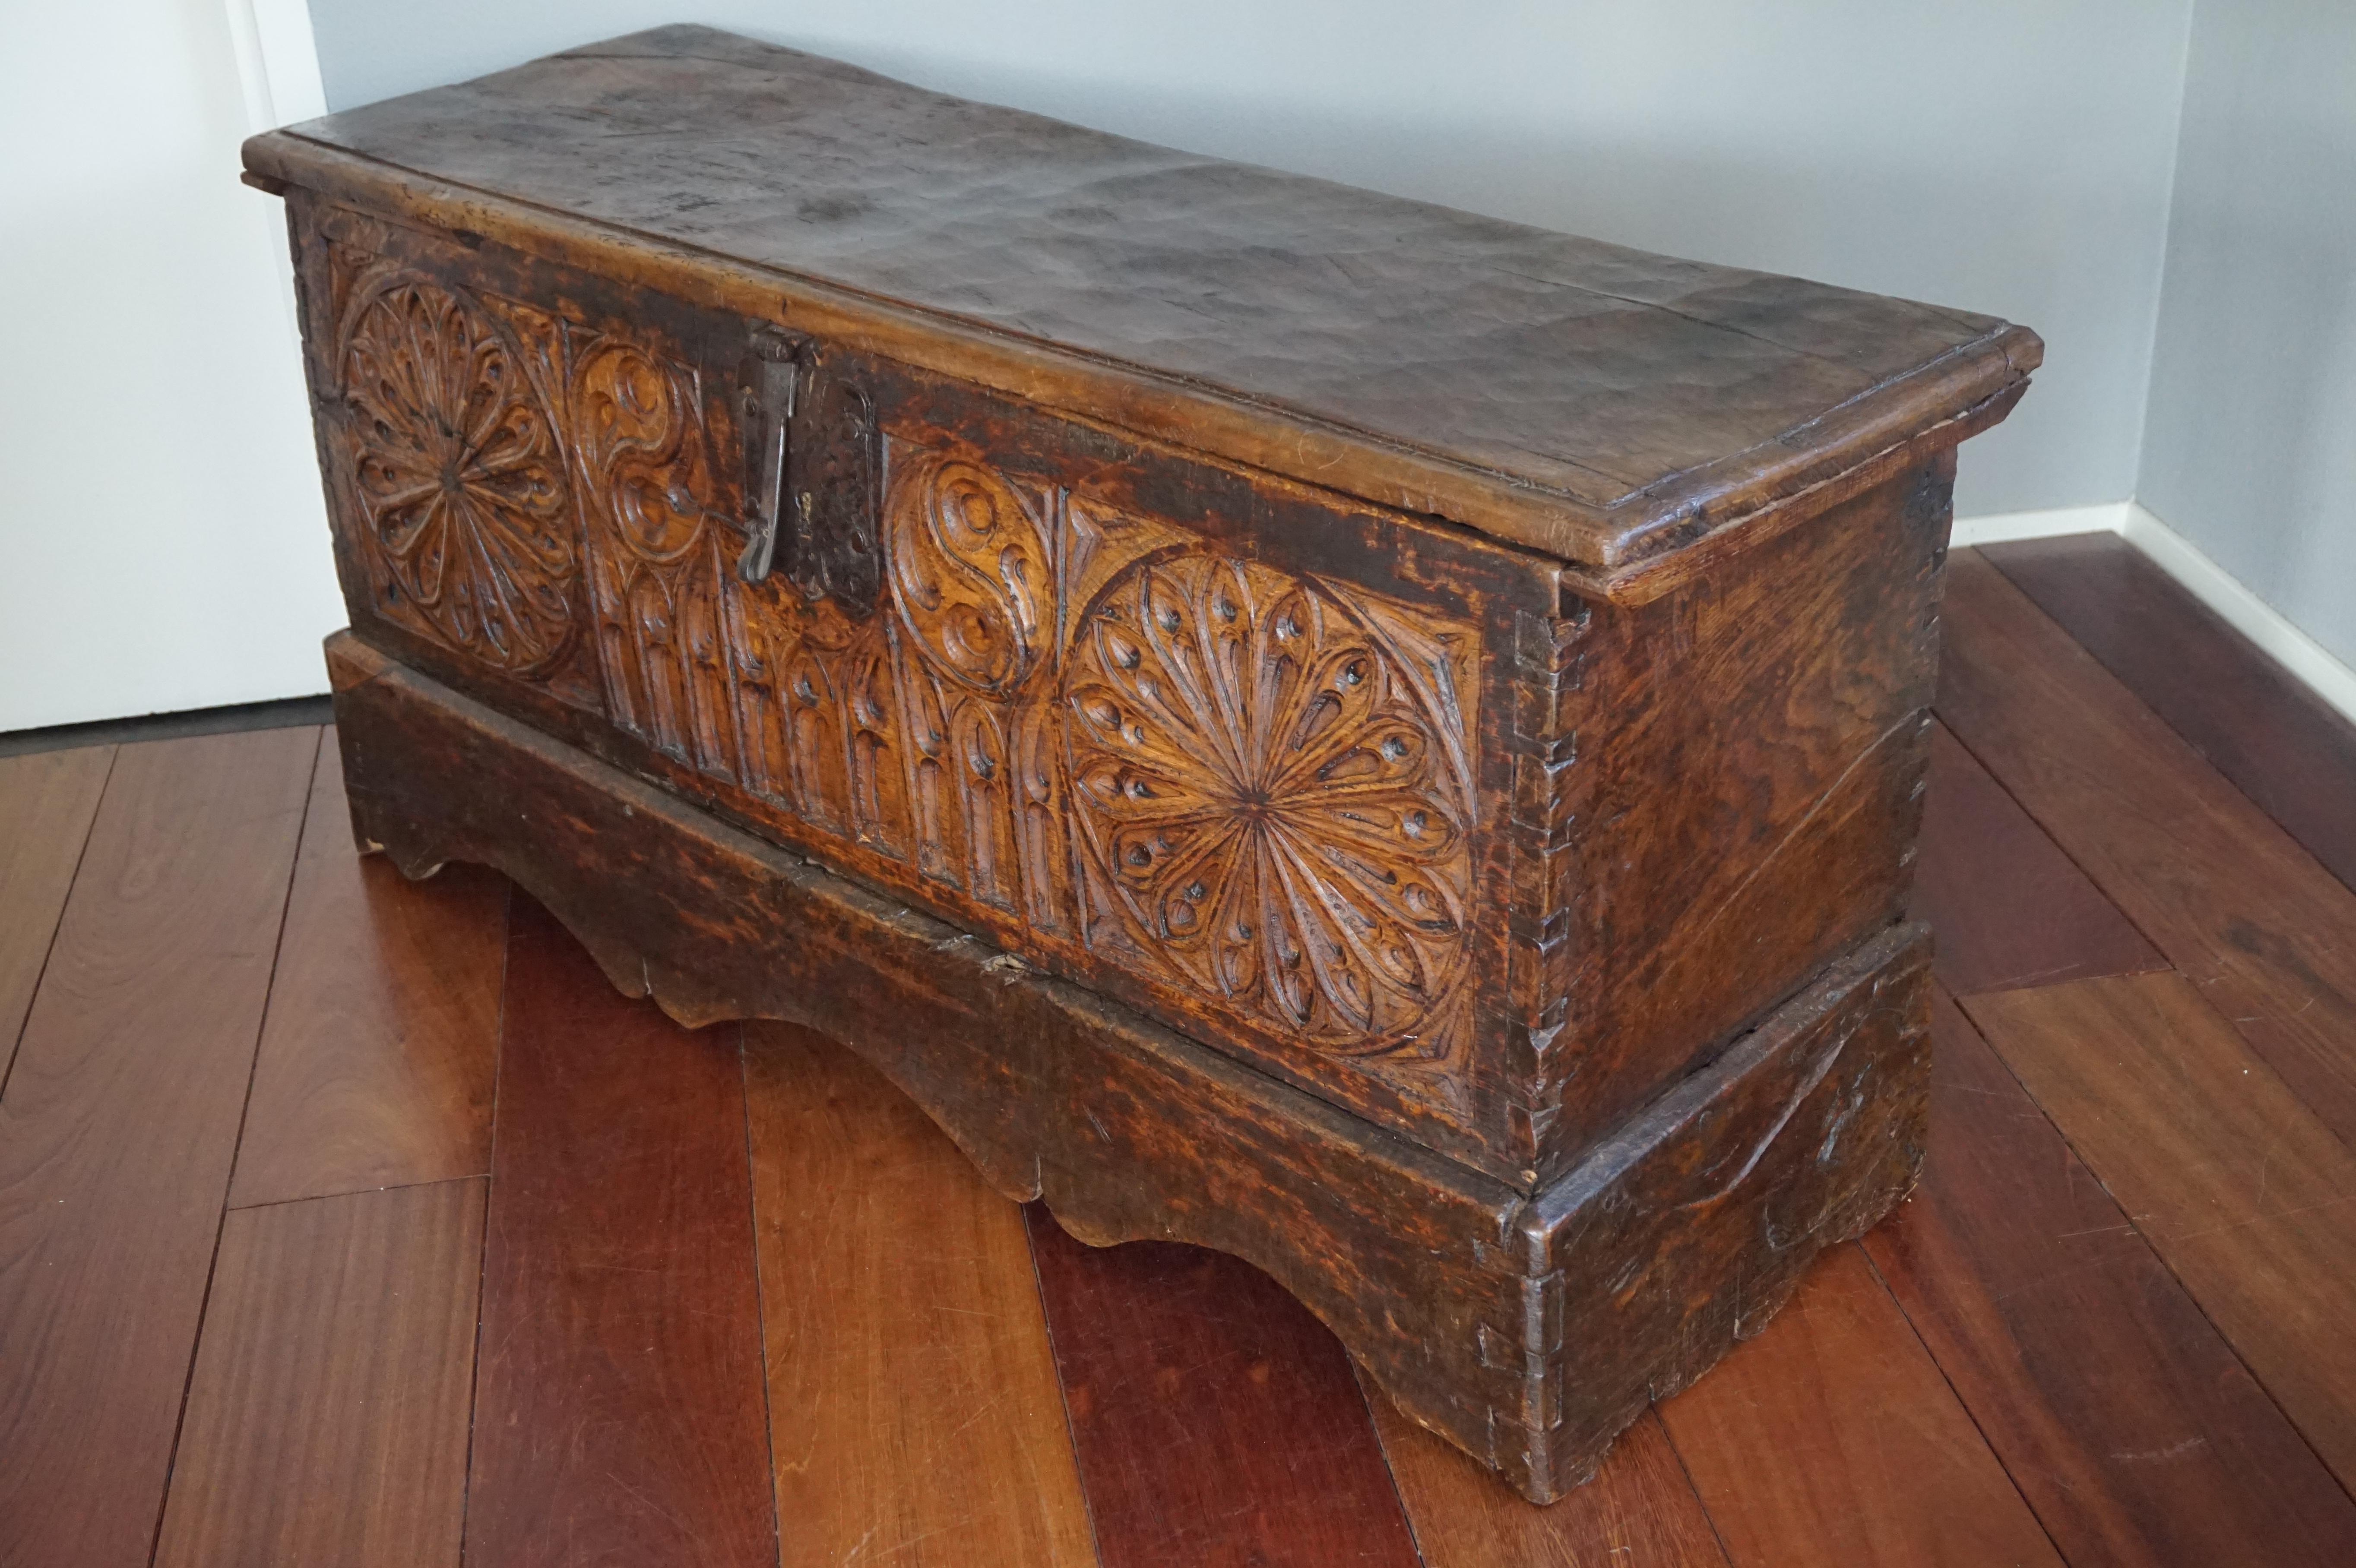 Antique Gothic Revival Blanket Chest / Trunk with an Amazing Patina 1680 - 1720 5